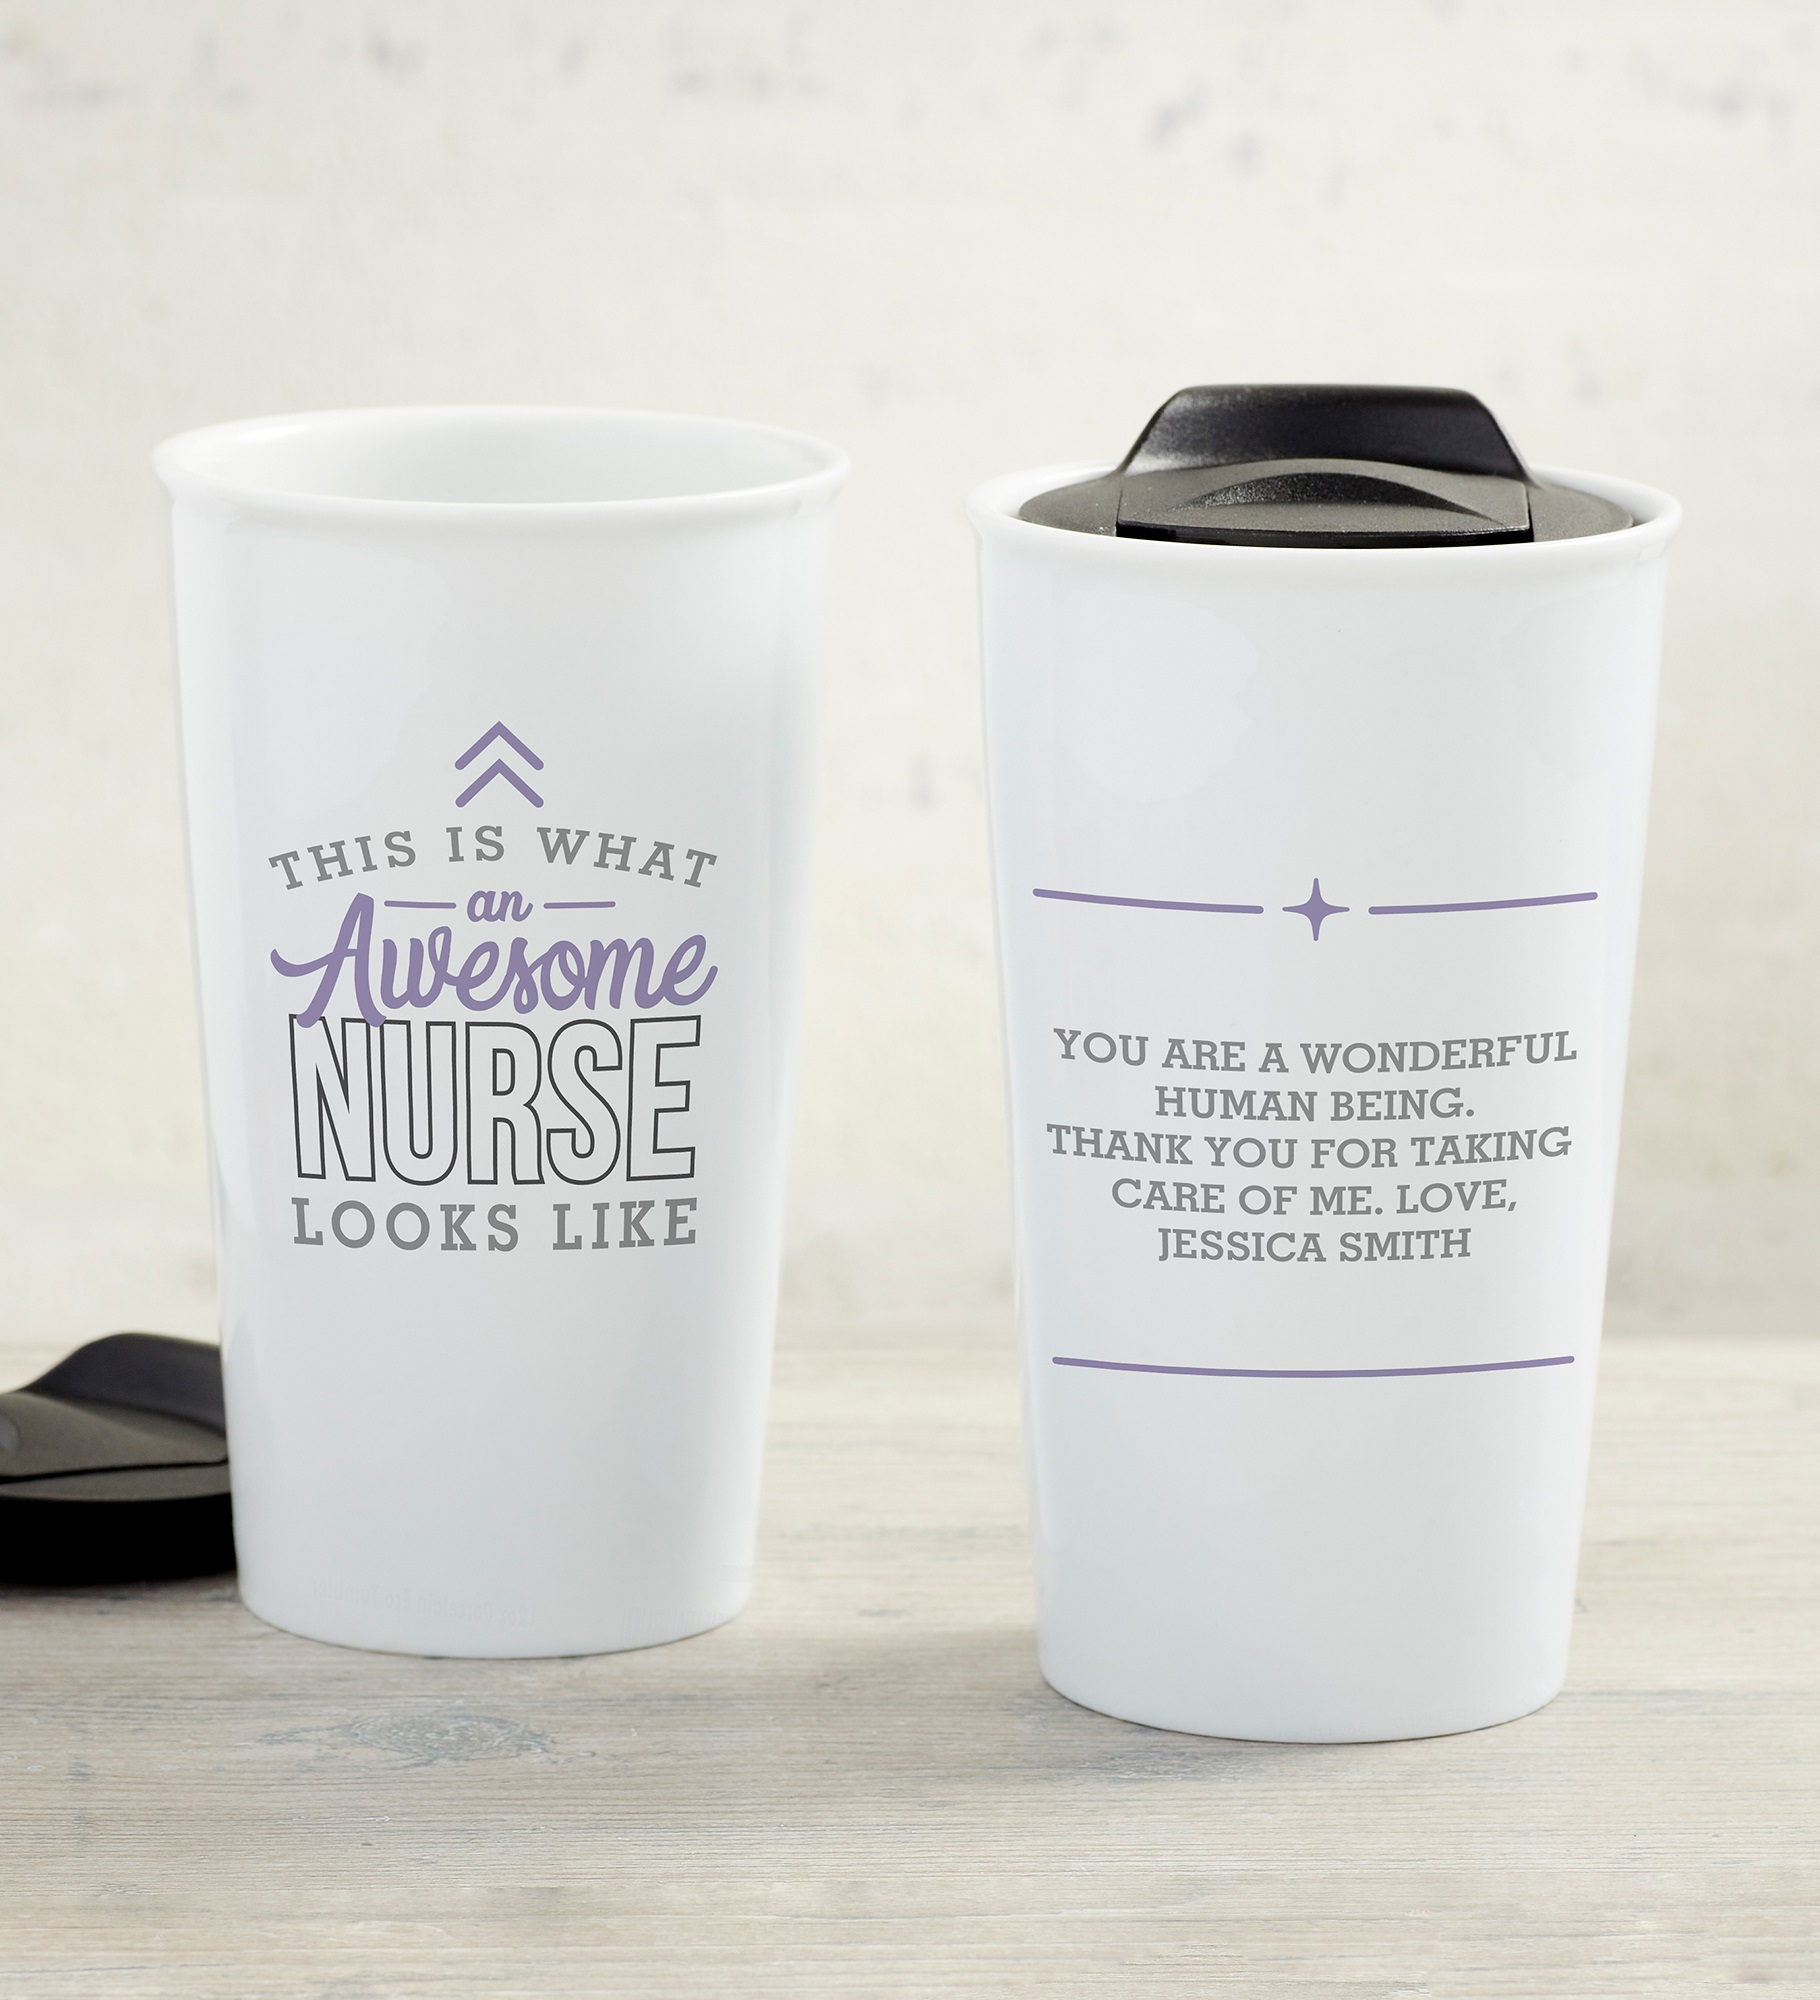 This Is What an Awesome Nurse Looks Like Personalized 12 oz. Ceramic Travel Mug